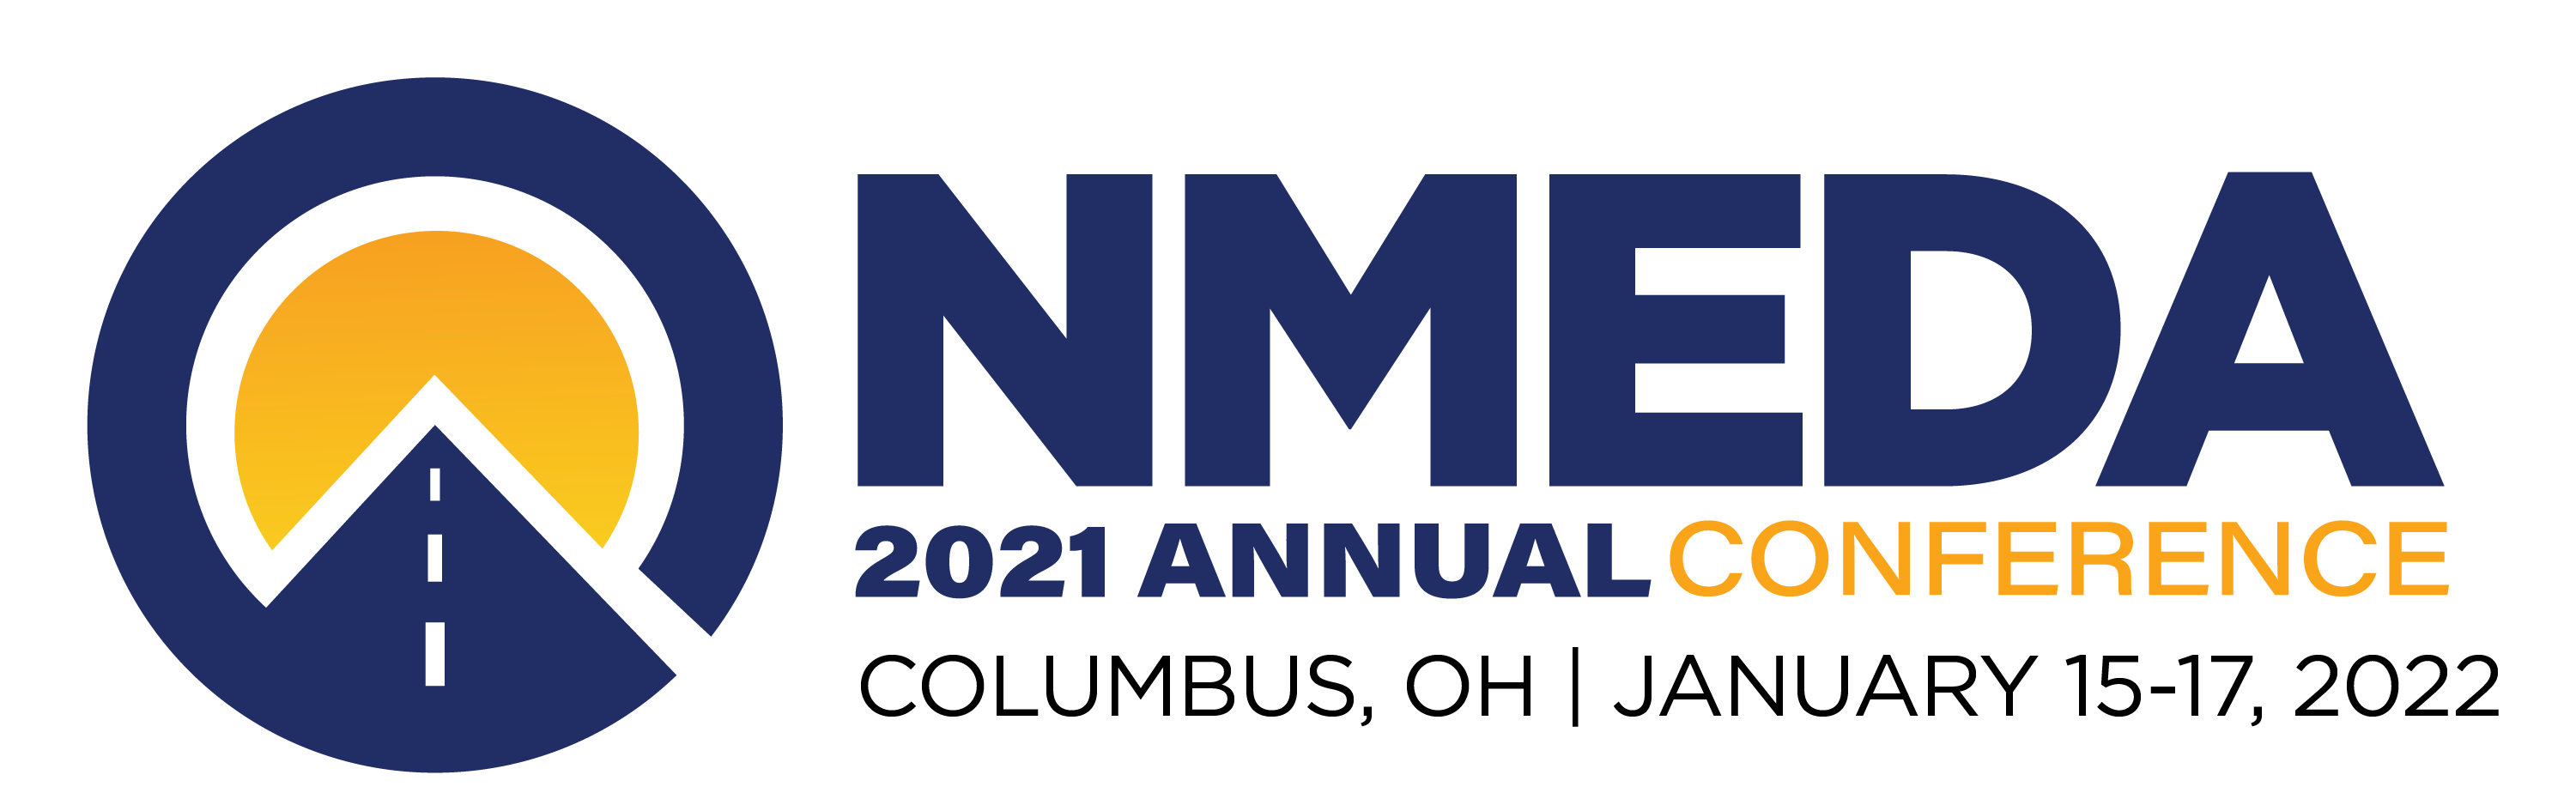 Annual Conference 2021 NMEDA